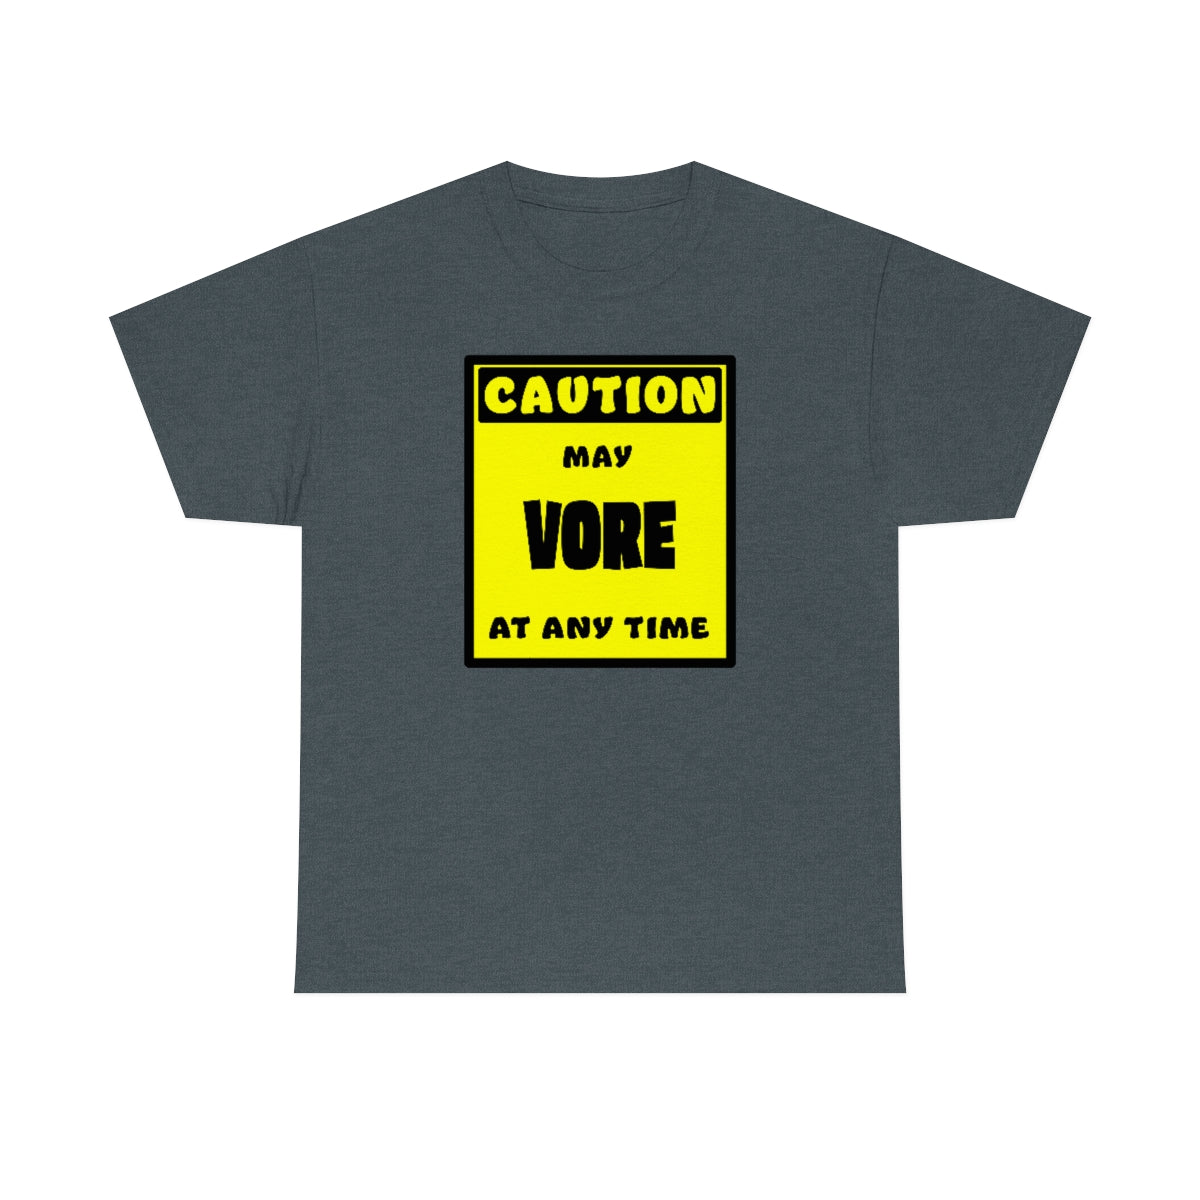 CAUTION! May VORE at any time! - T-Shirt T-Shirt AFLT-Whootorca Dark Heather S 